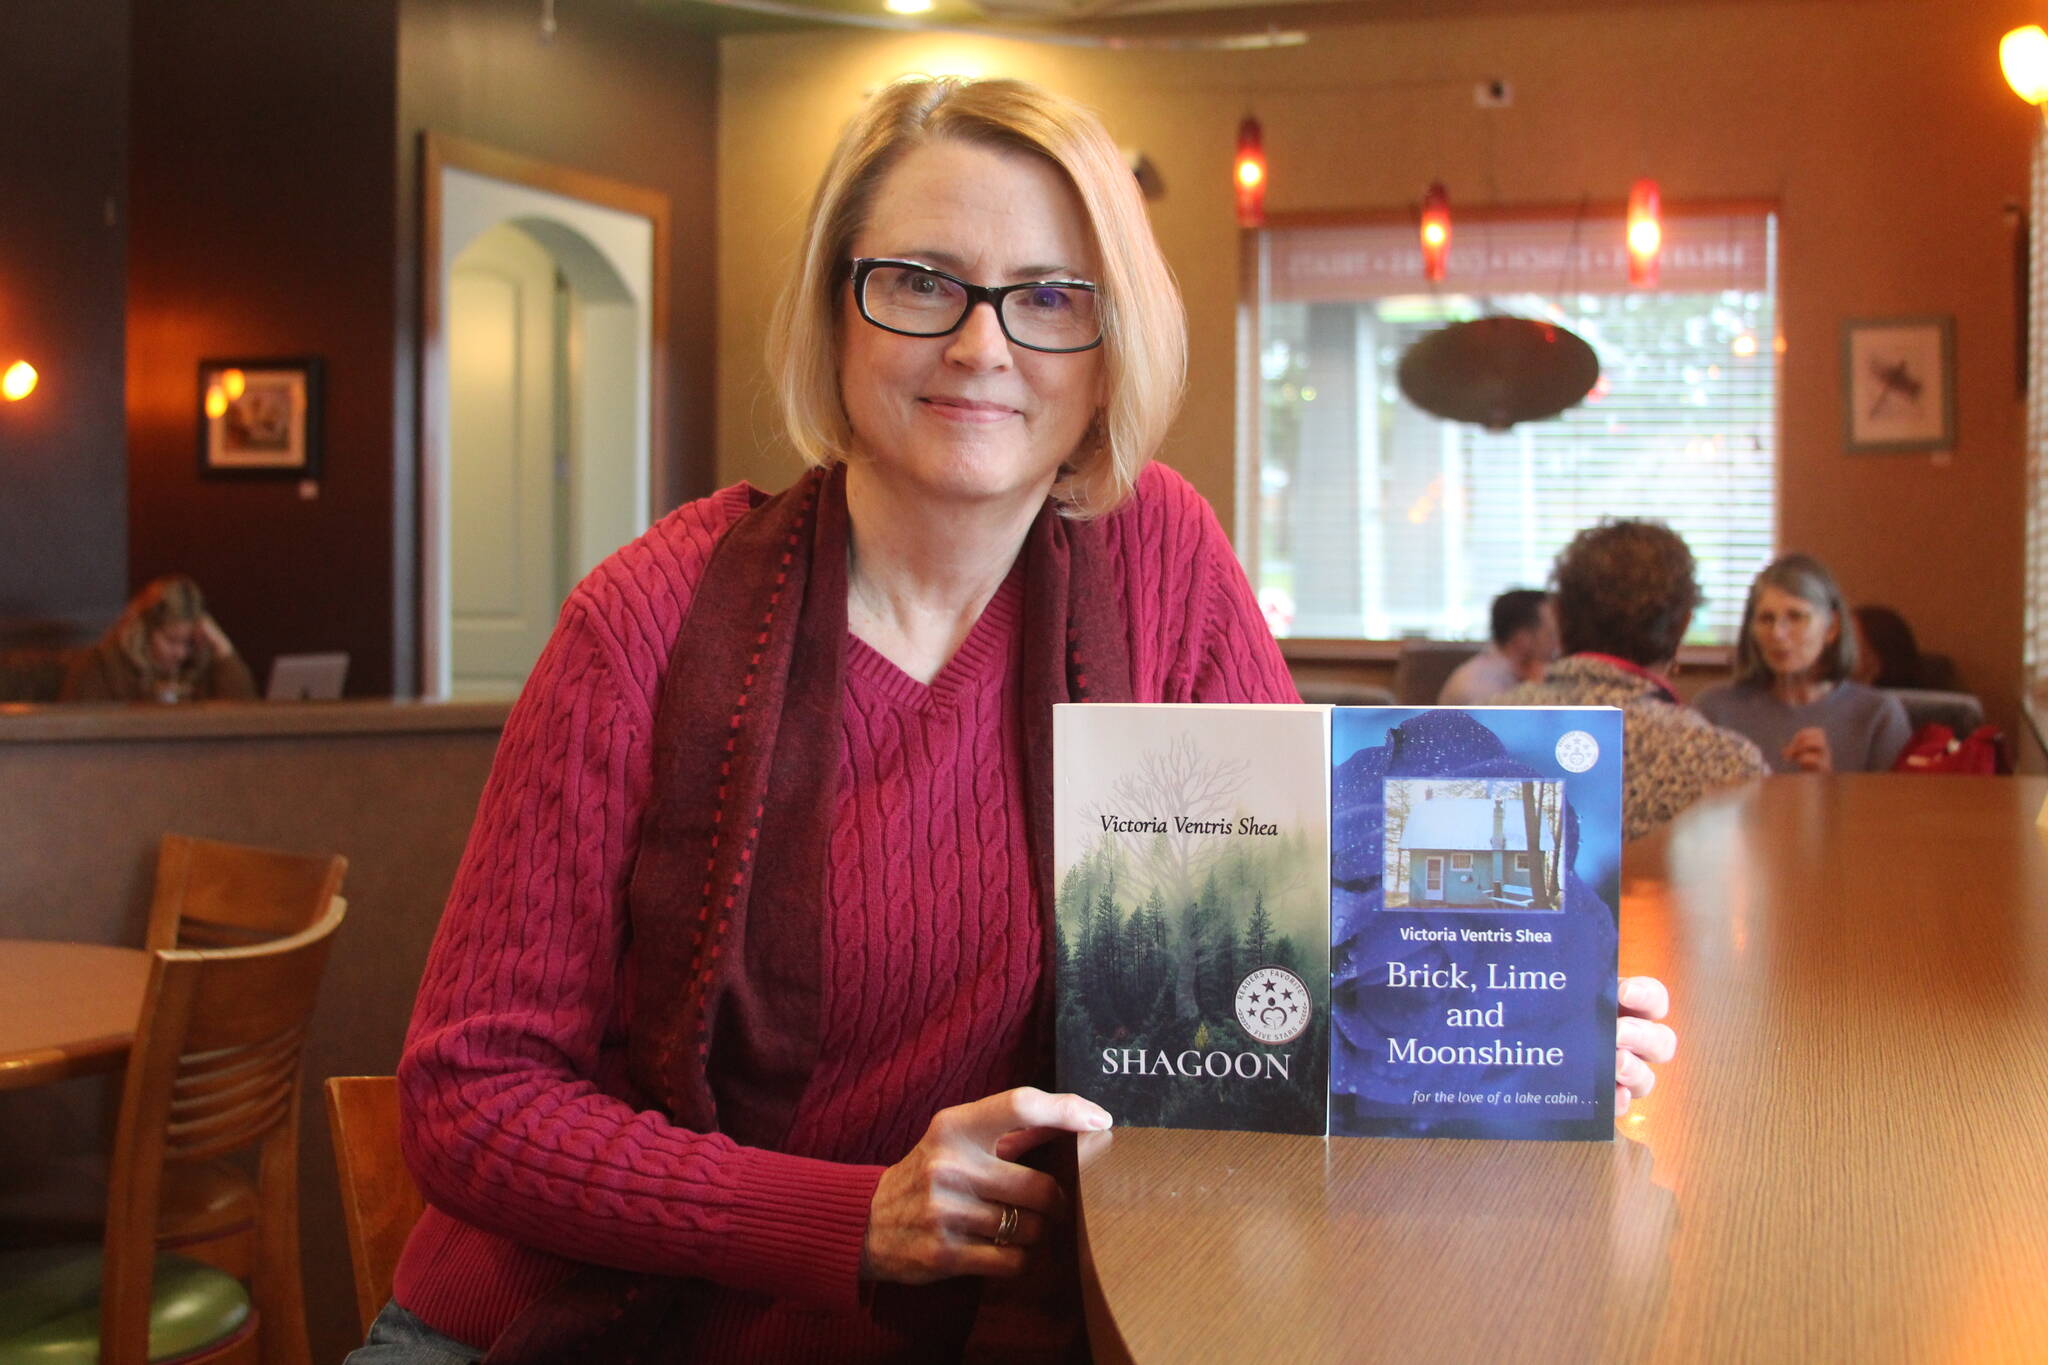 Whidbey author Victoria Shea will discuss her books, “Shagoon” and “Brick, Lime and Moonshine” at an event at Kingfisher Bookstore in February. (Photo by Karina Andrew/Whidbey News-Times)